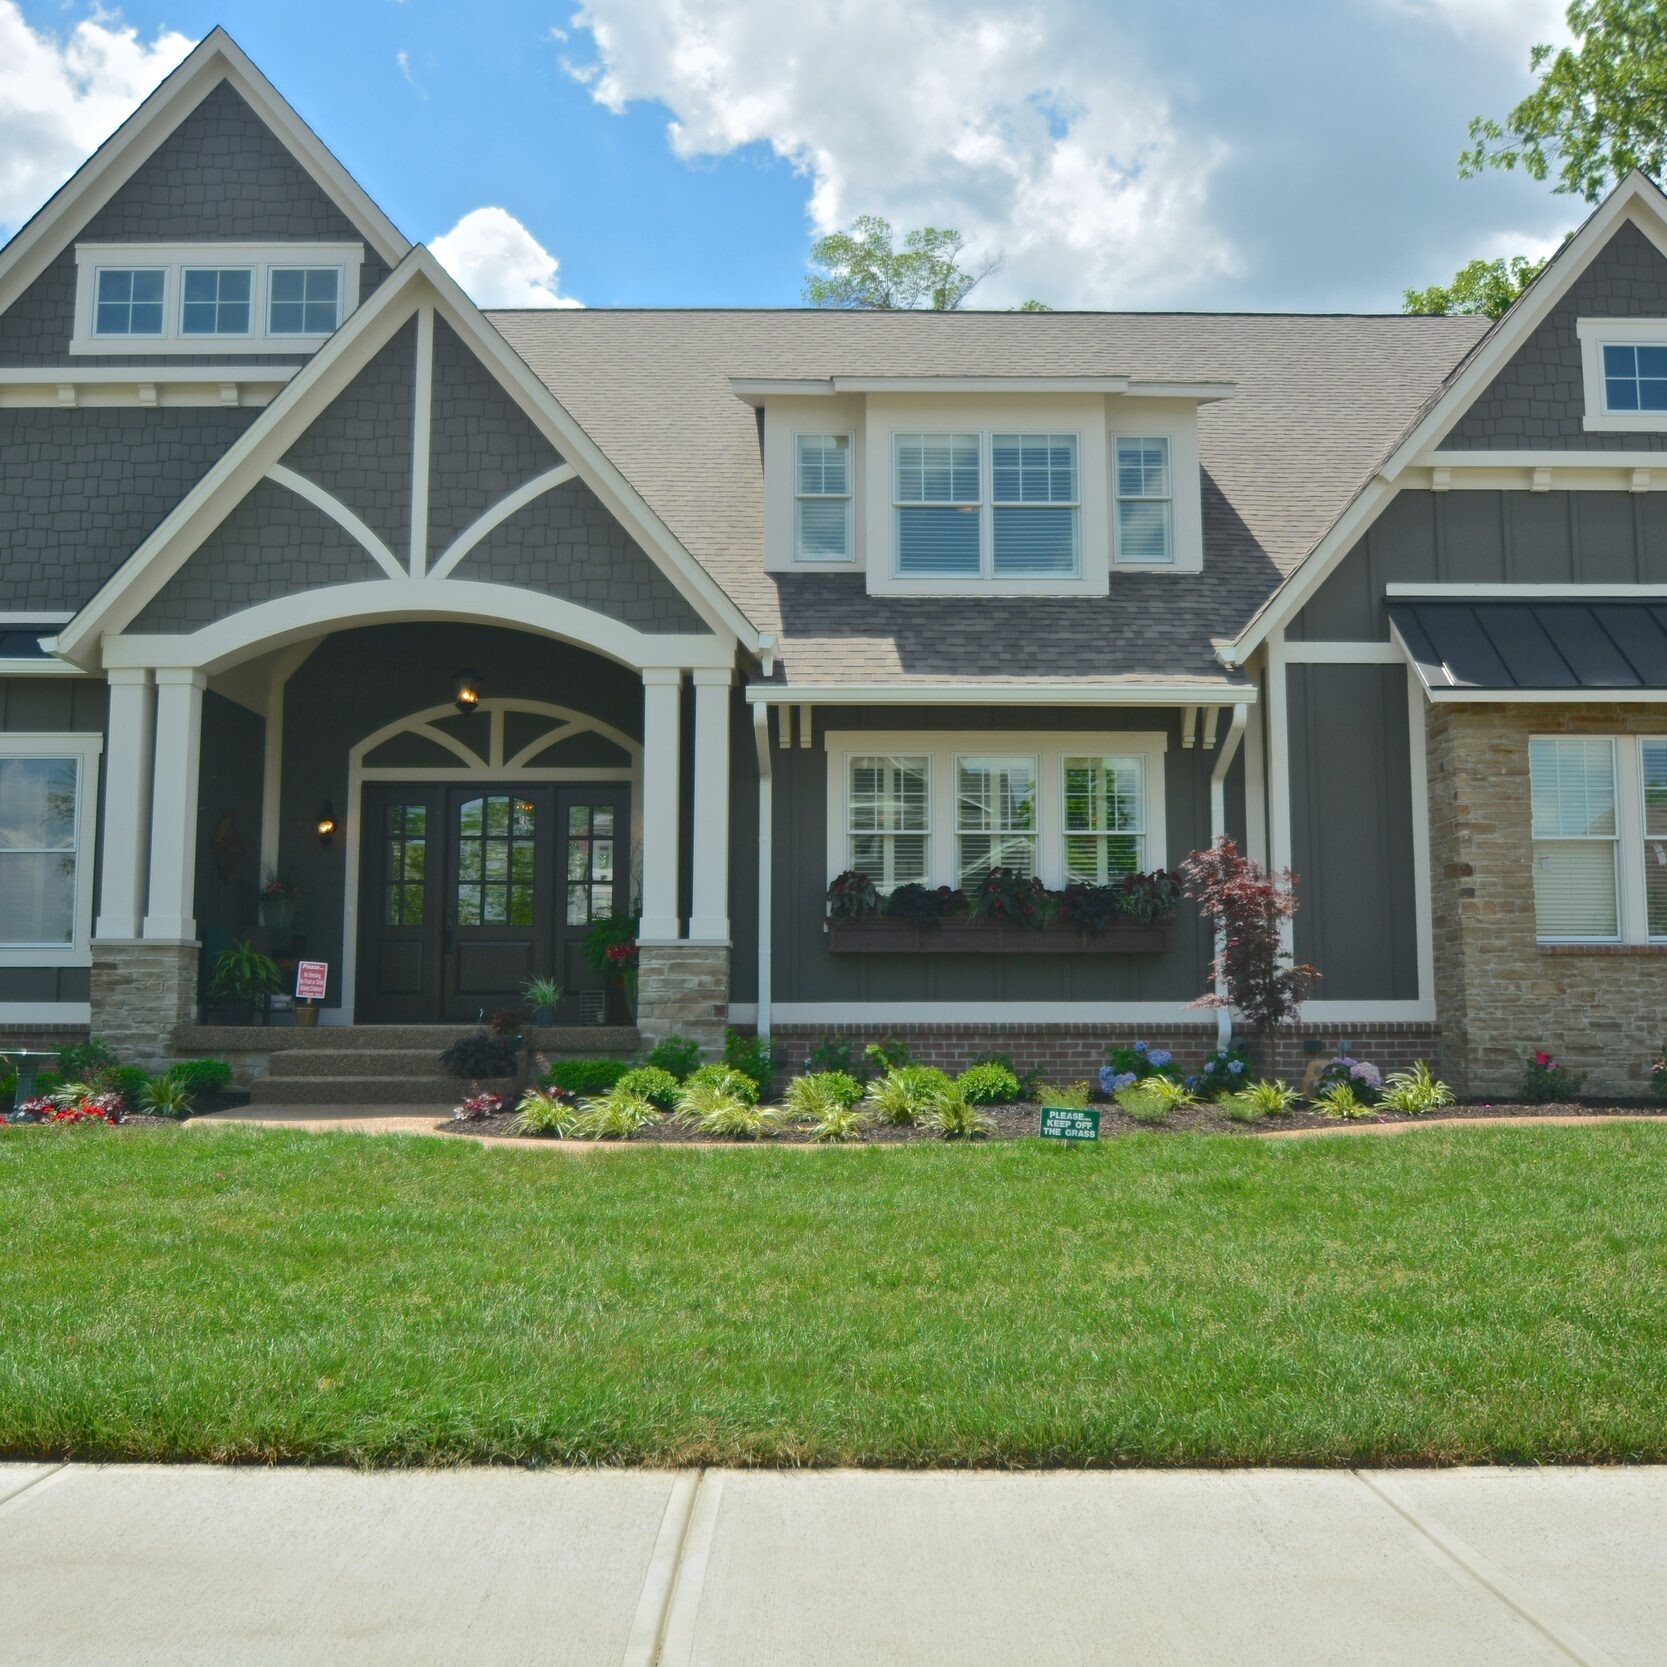 The exterior of a new home with gray siding and a green lawn, built by a custom home builder in Westfield.